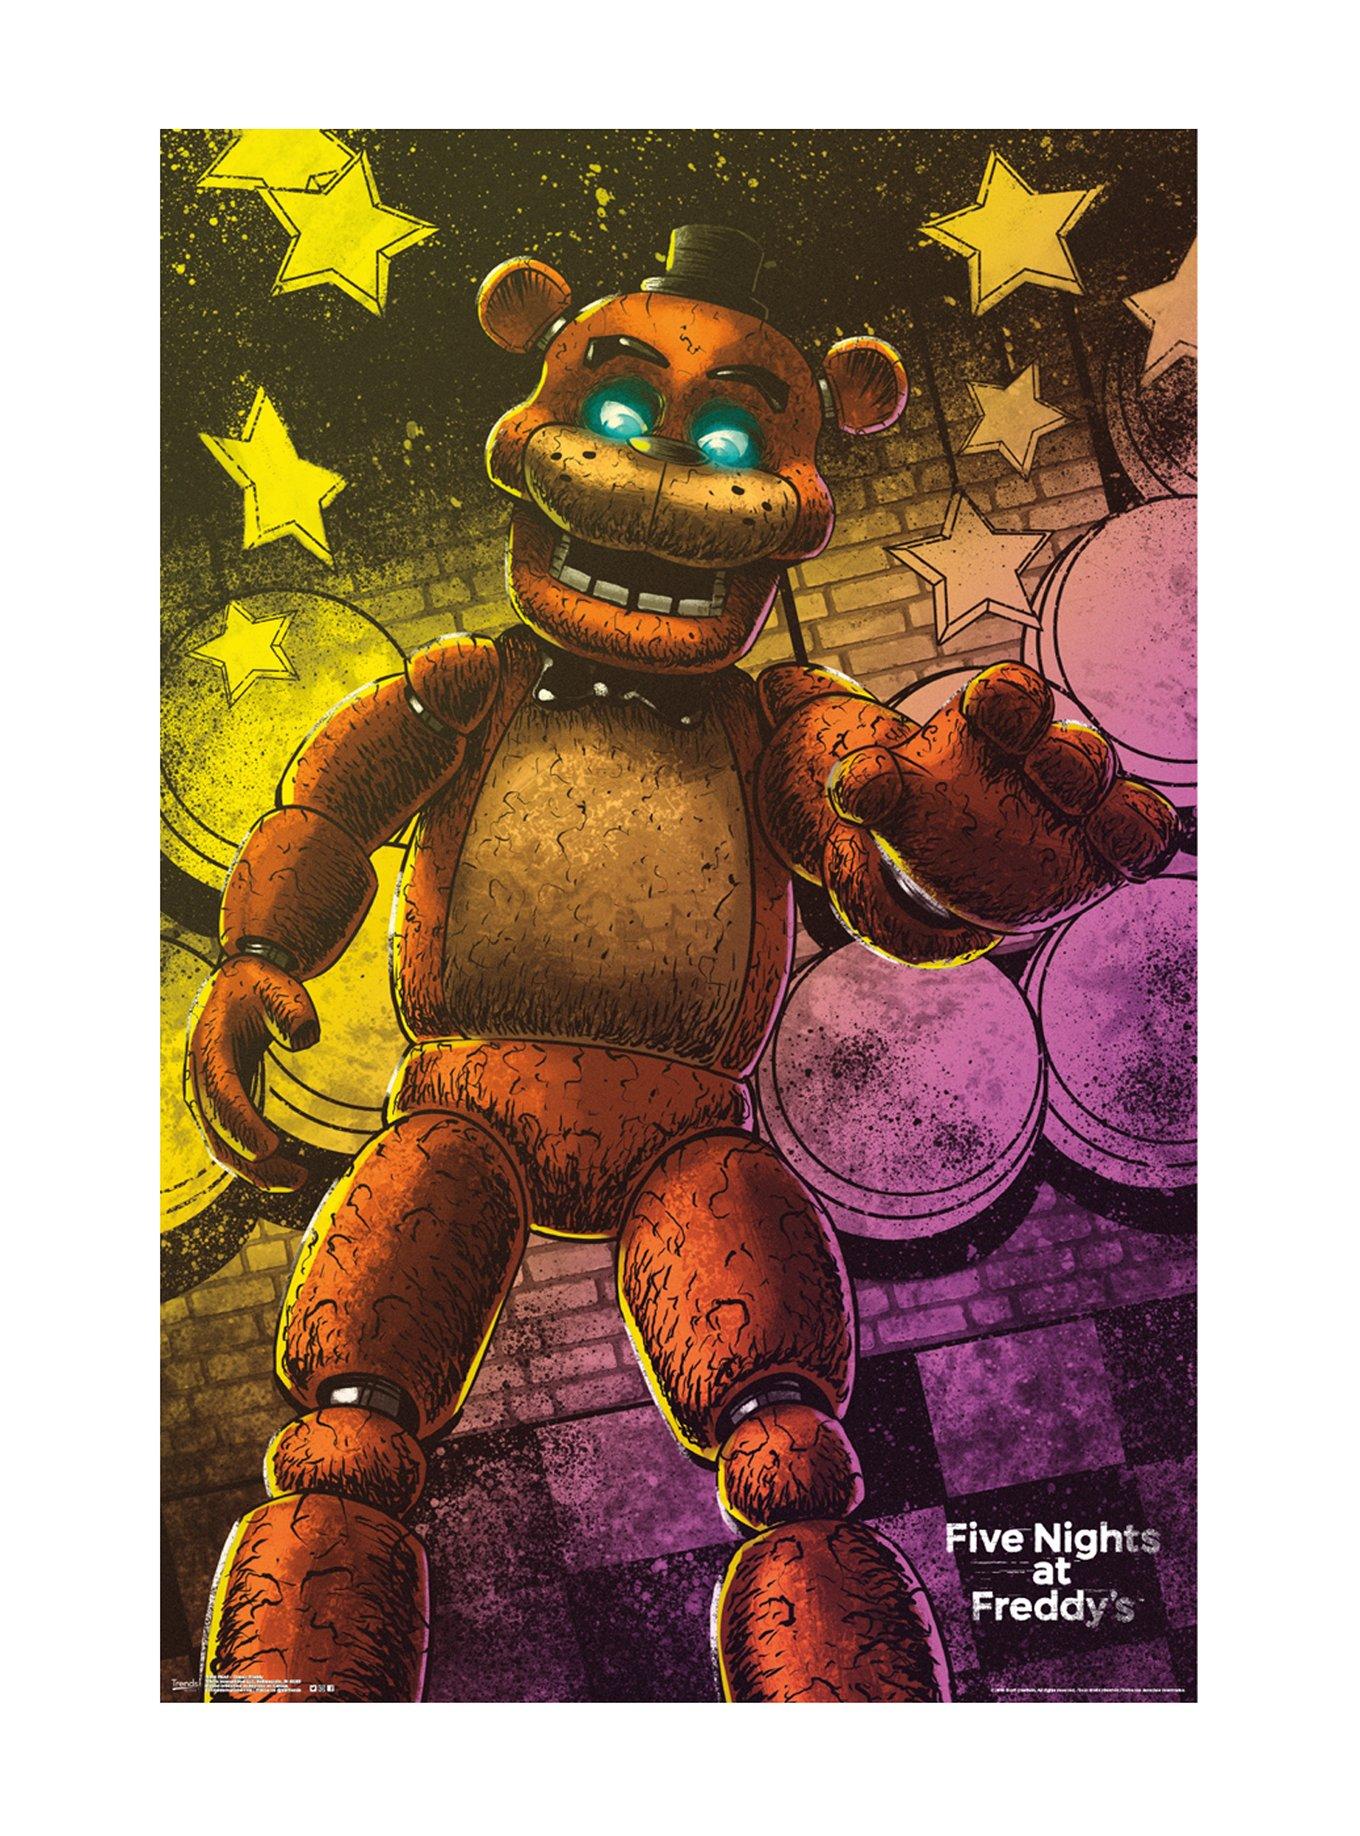 Hot Sell Five Night At Freddy Anime Fnaf Bear Free Assembly Action